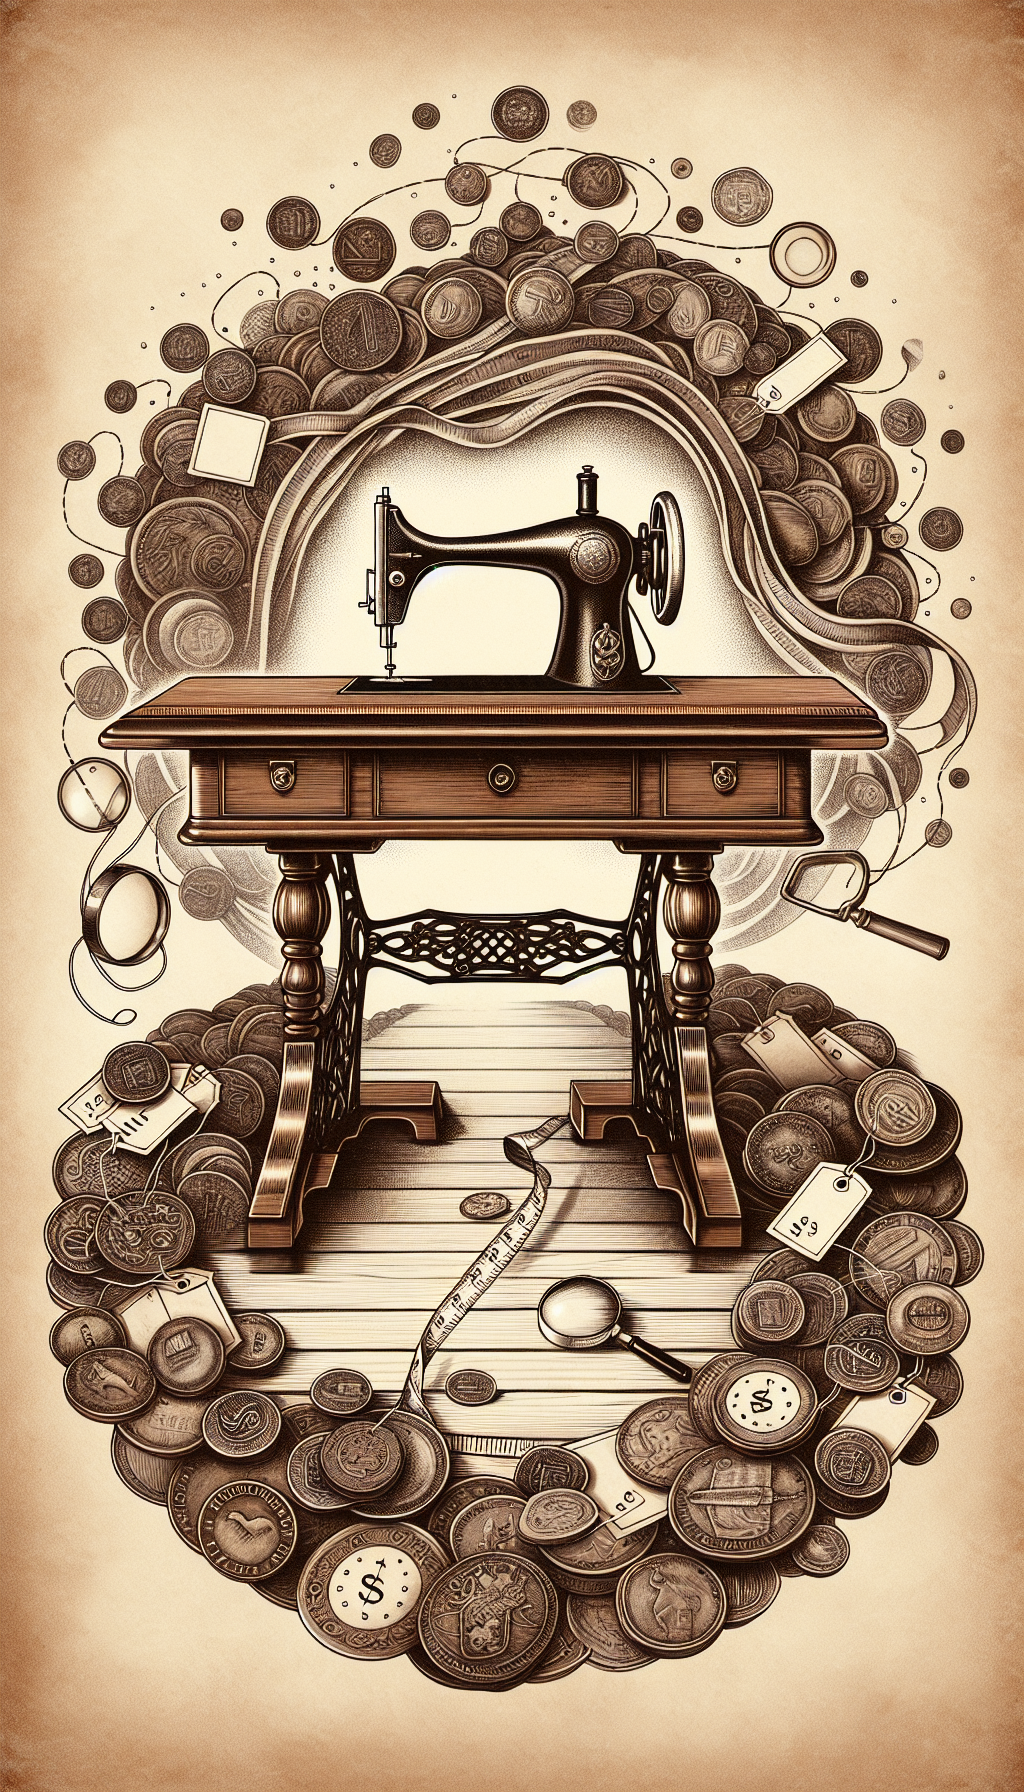 An elegant, sepia-toned illustration shows a pristine antique Singer sewing table against a background of swirling price tags and magnifying glasses, with vintage coins laid out as footsteps leading to an auctioneer's gavel. A tape measure subtly outlines the table's silhouette to signify appraisal, bridging past craftsmanship with present value.